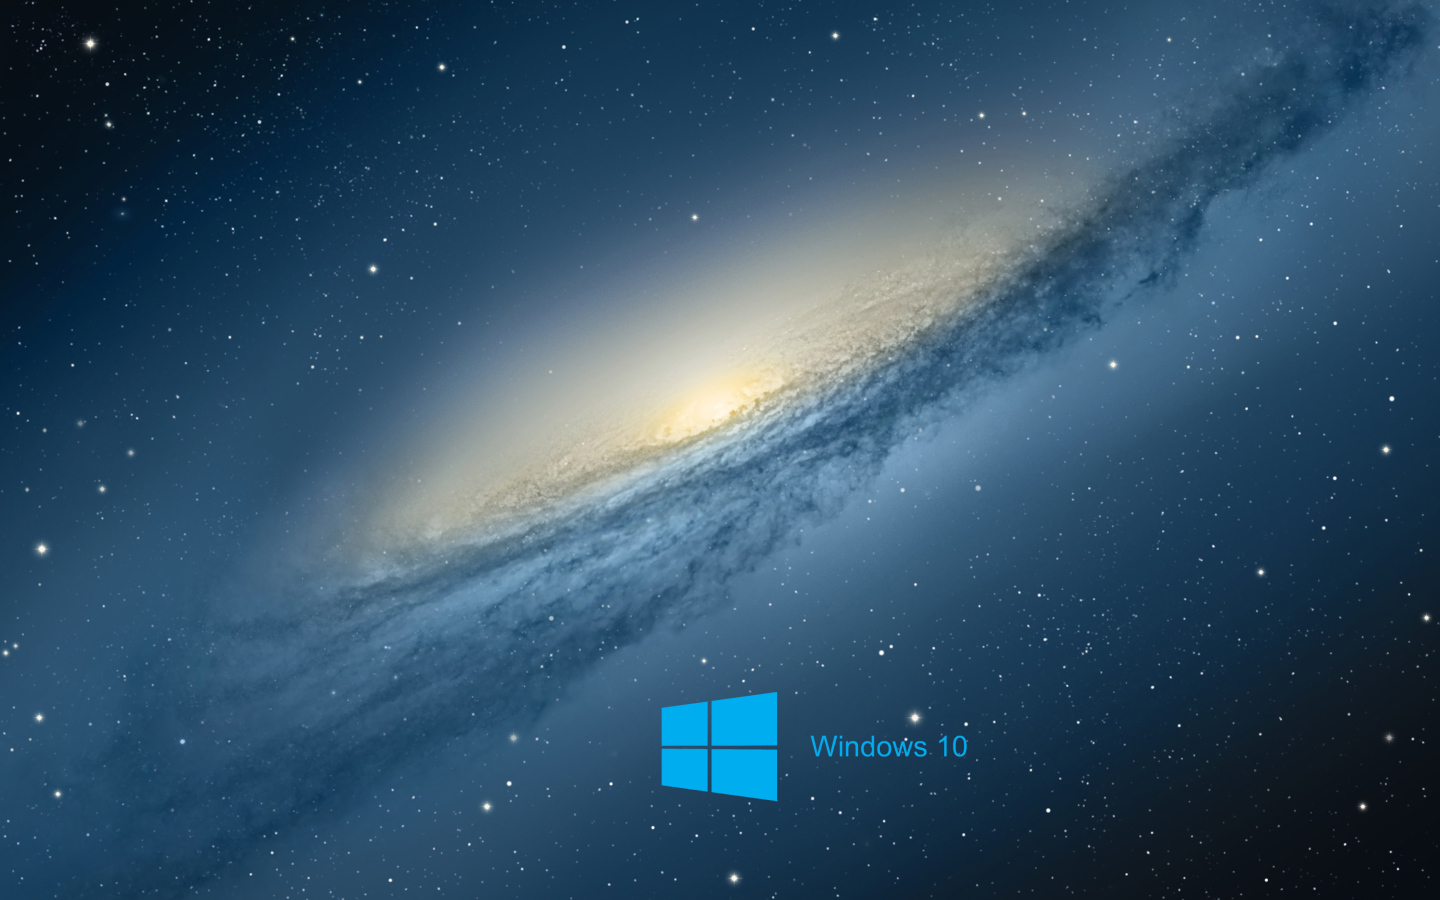 Picture with Windows 10 operating system